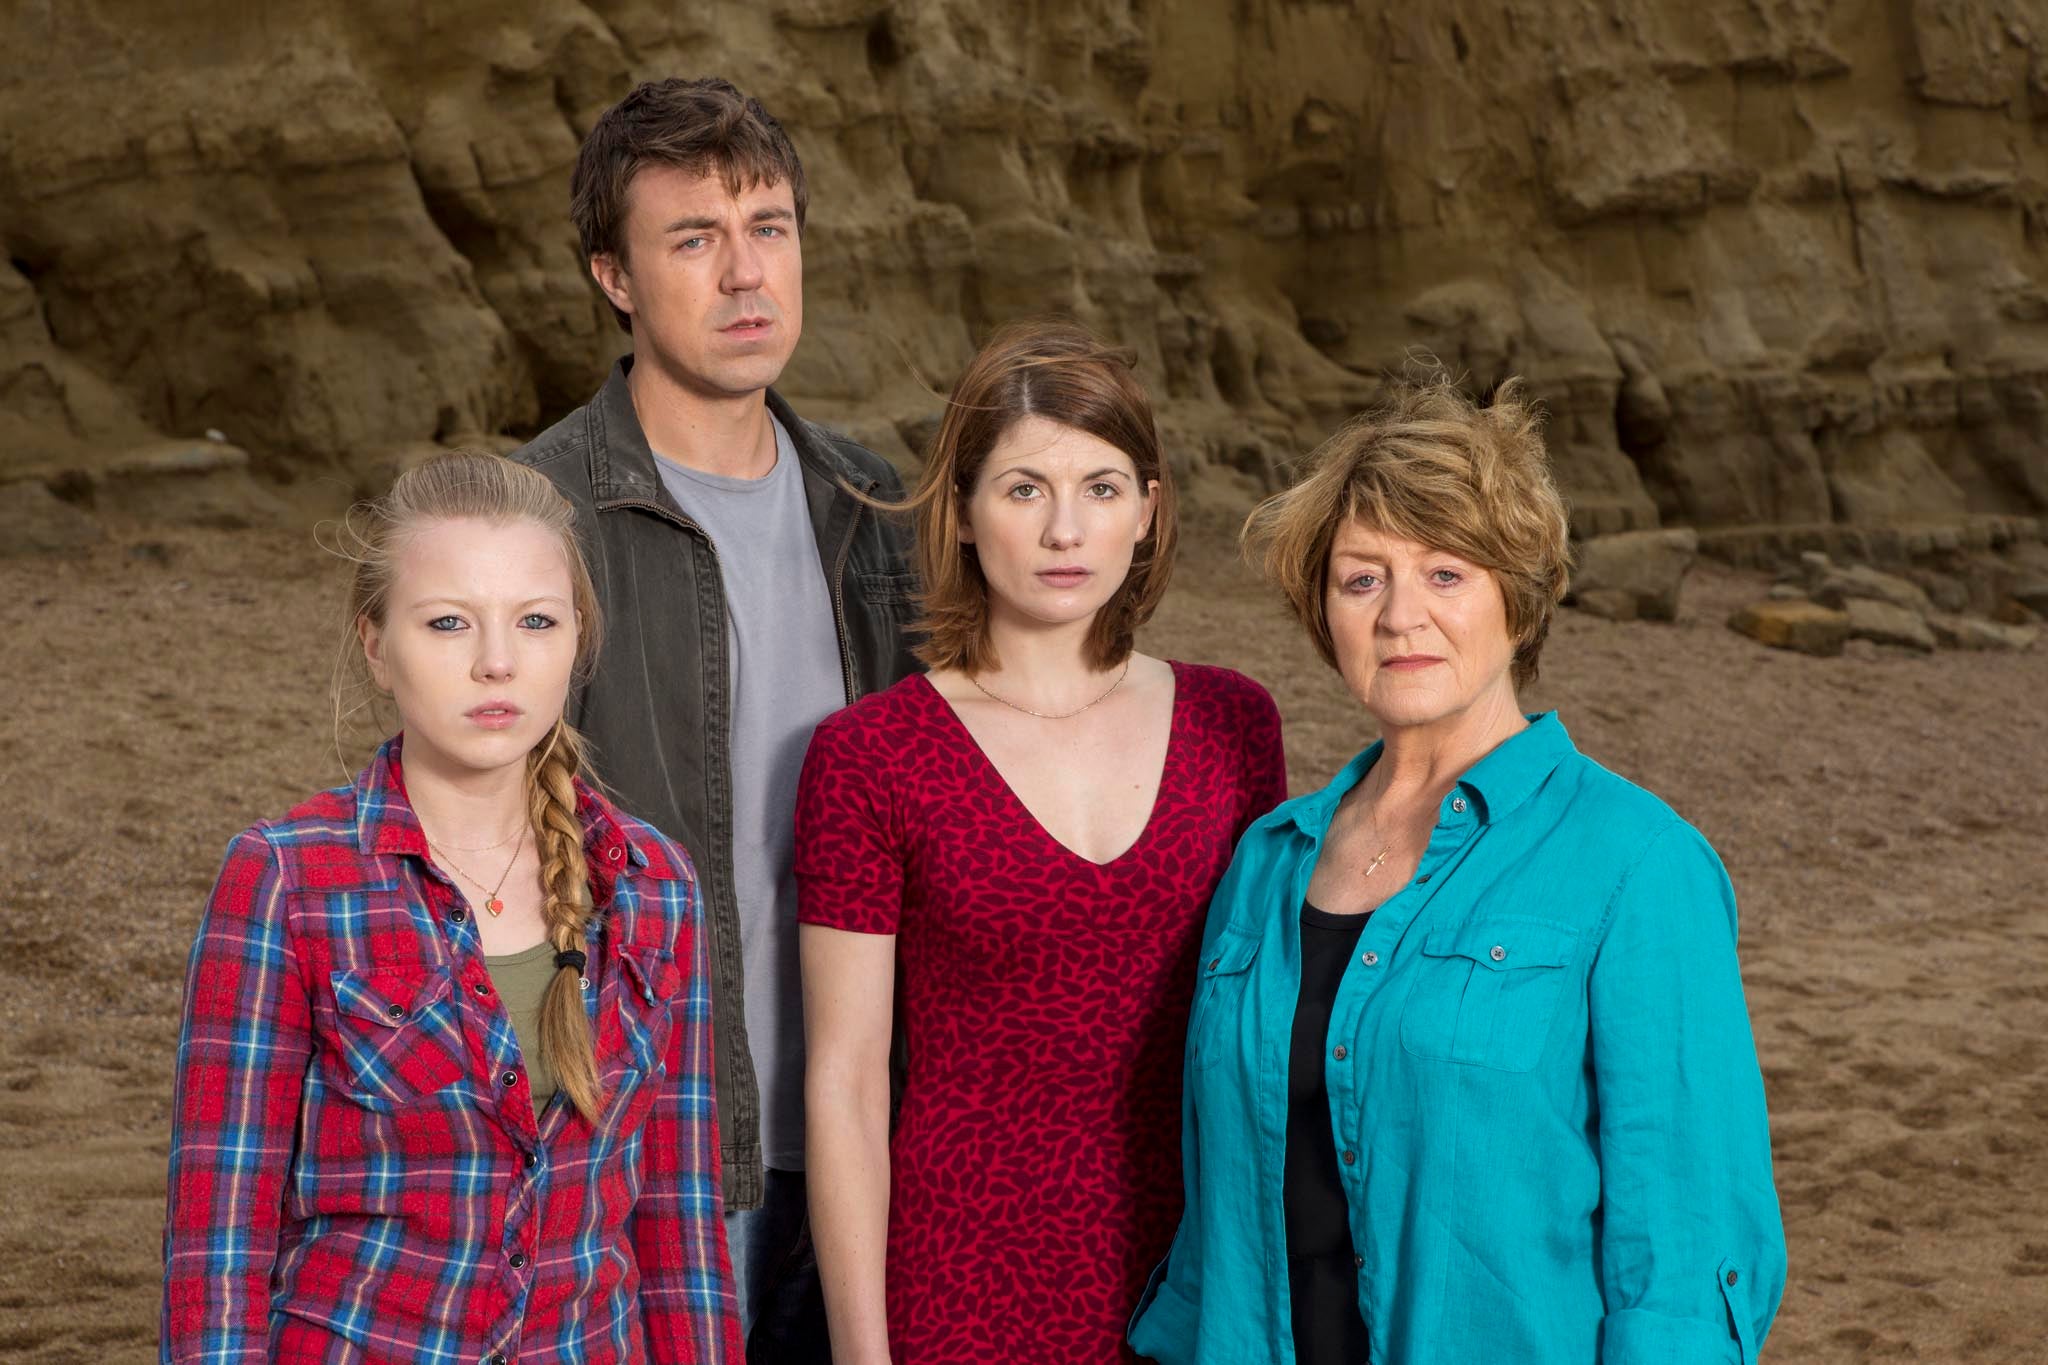 The Latimer family from ITV's 'Broadchurch'